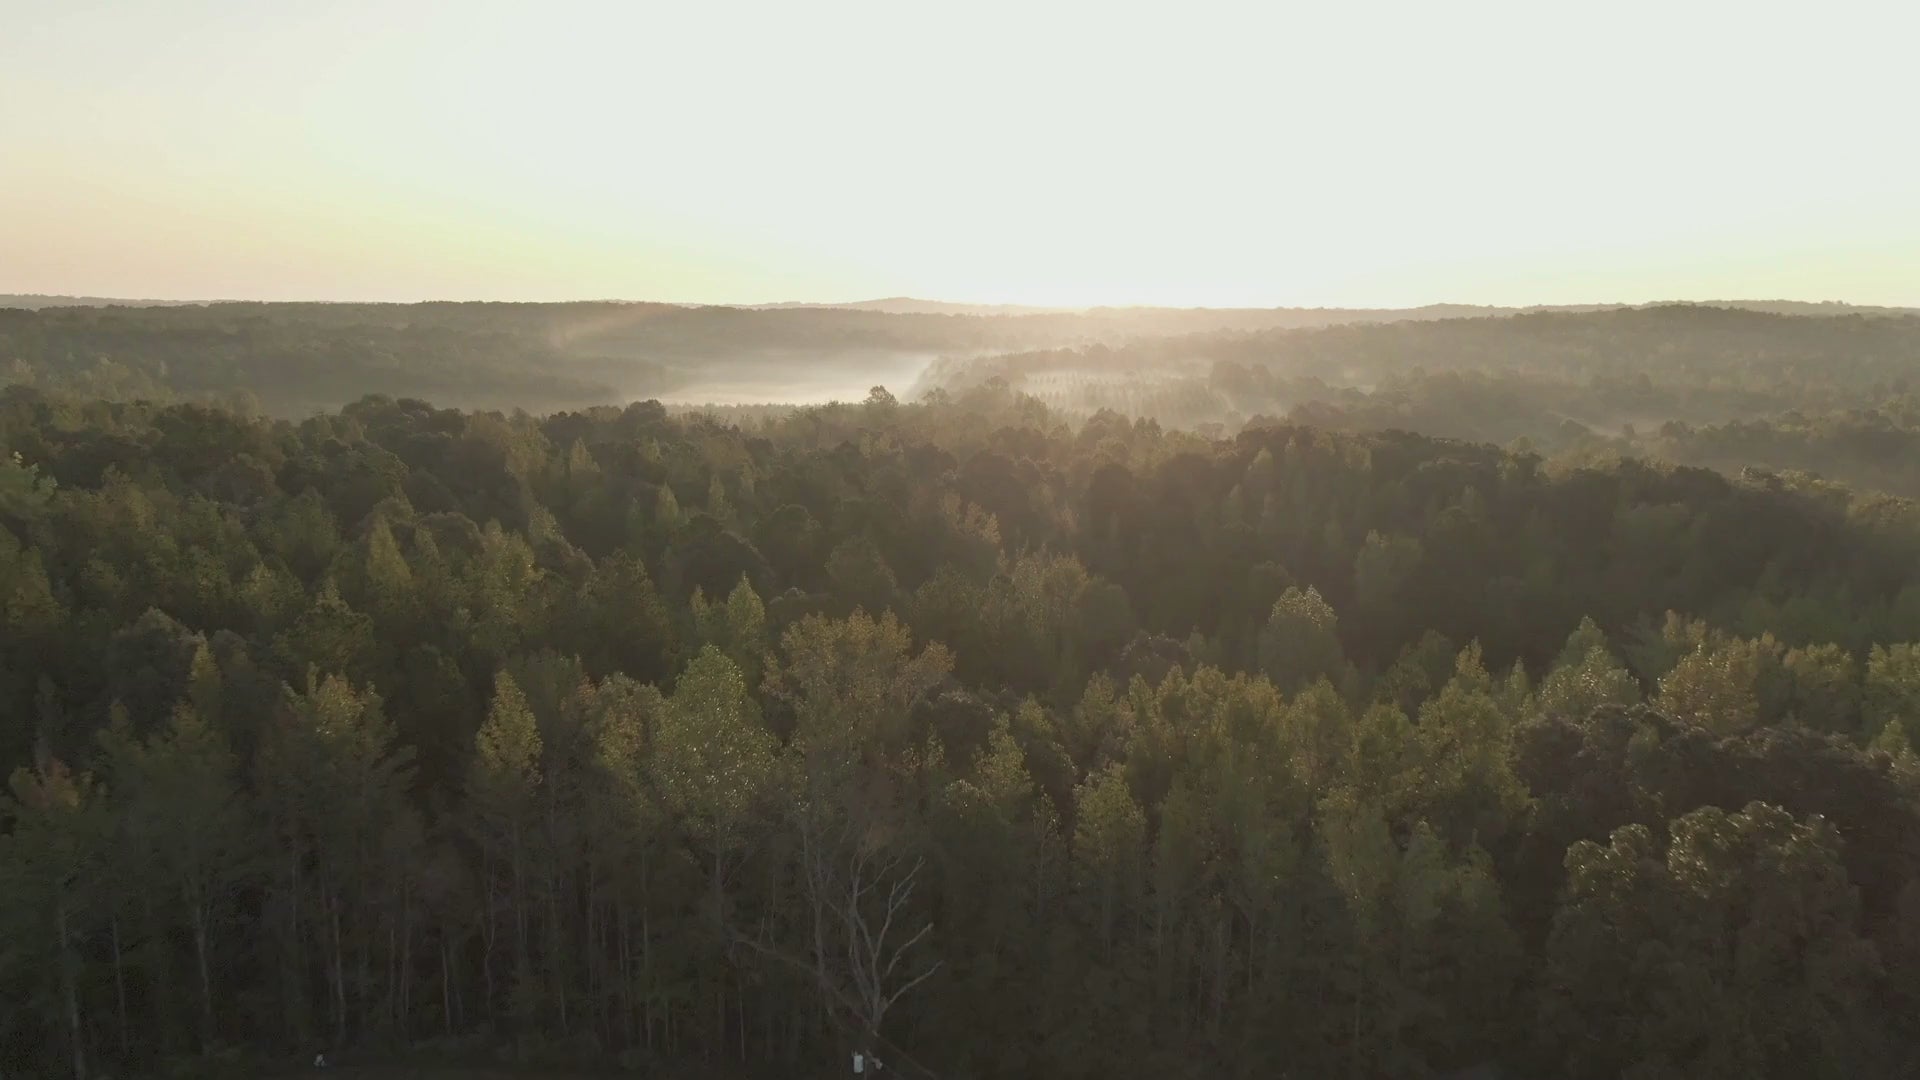 Video laden: Video by James Cheney showing drove footage of a forest in Germany: https://www.pexels.com/video/drone-footage-of-a-dense-forest-3177845/